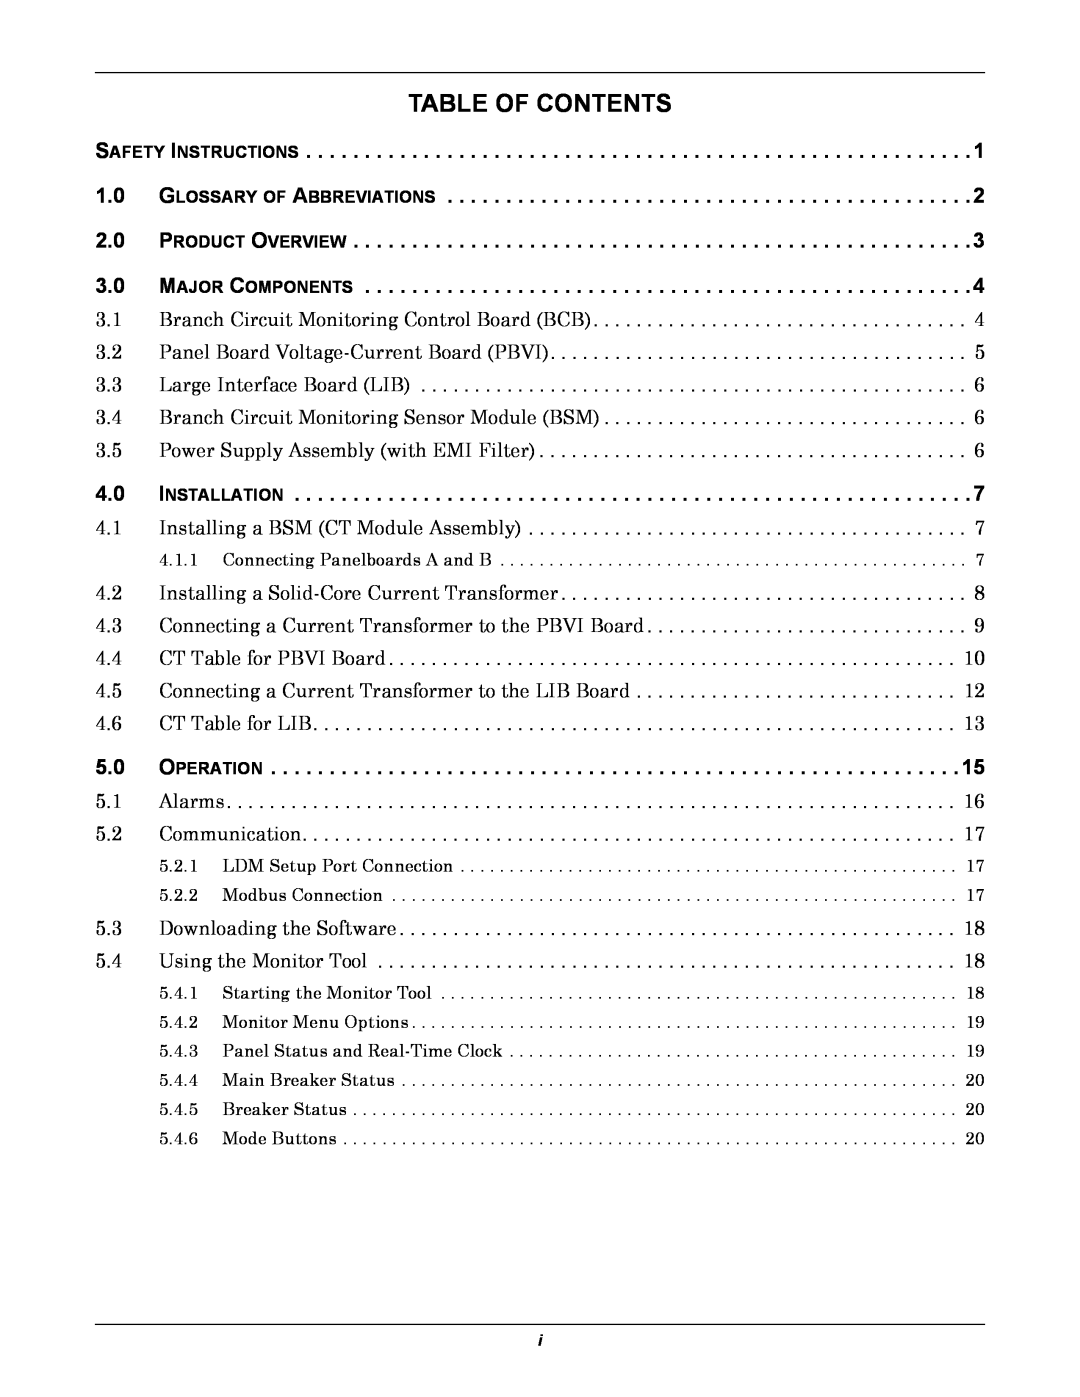 Liebert LDM Table Of Contents, SAFETY INSTRUCTIONS 1.0 GLOSSARY OF ABBREVIATIONS, PRODUCT OVERVIEW 3.0 MAJOR COMPONENTS 